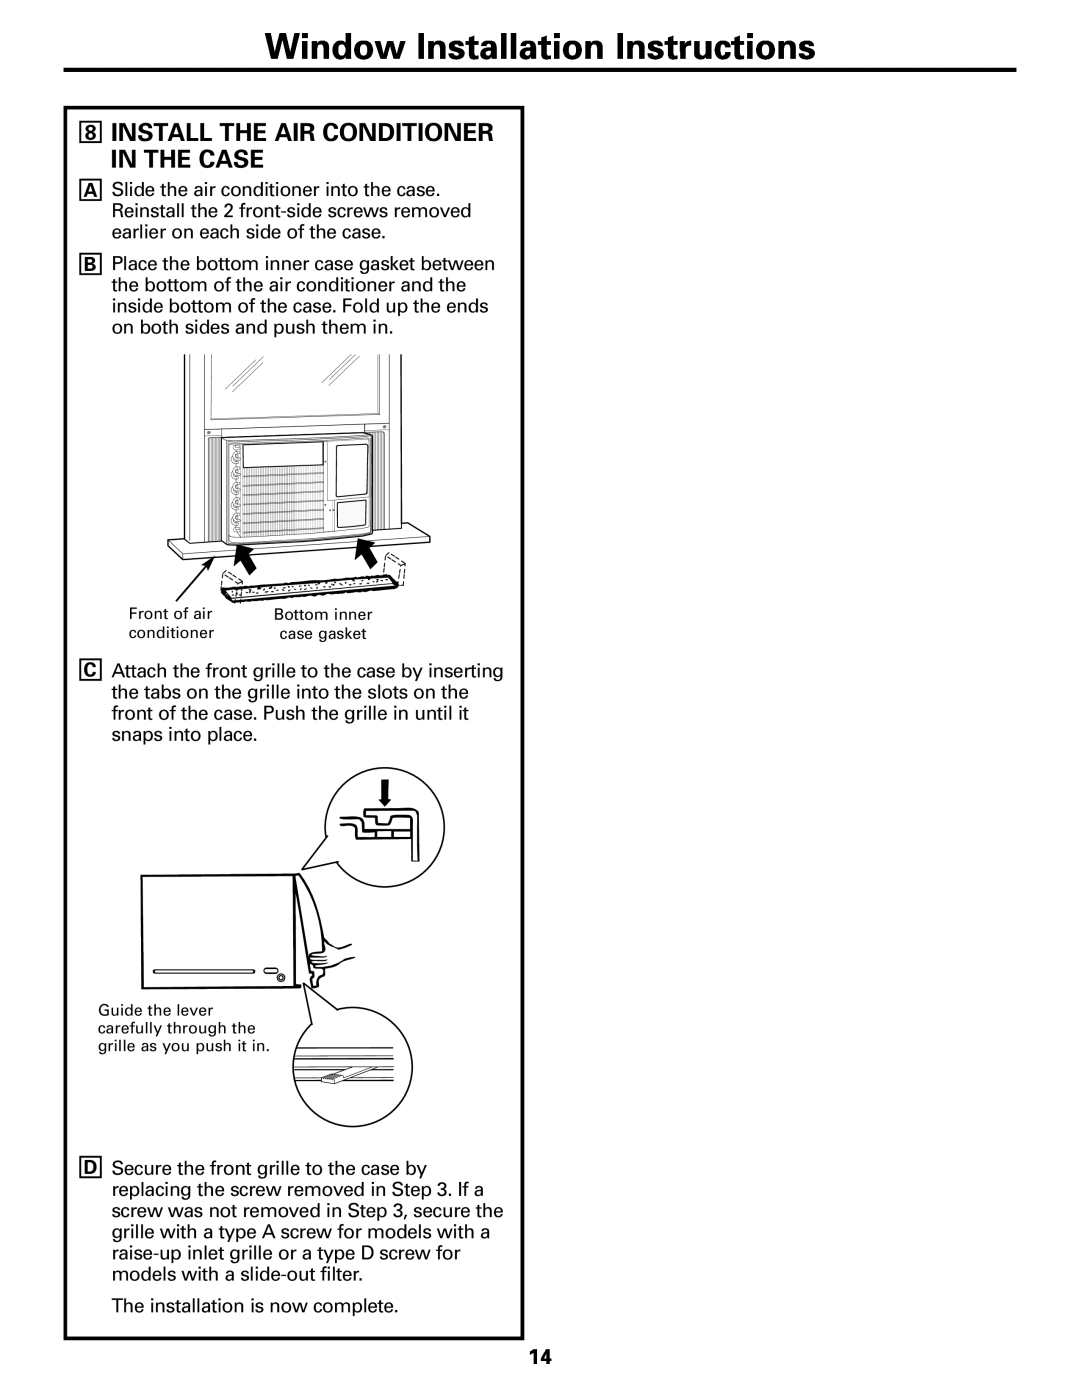 GE ASL24, ASW24, ASW18, ASV24, ASN24, ASM24, ASF24 Install The Air Conditioner In The Case, Window Installation Instructions 